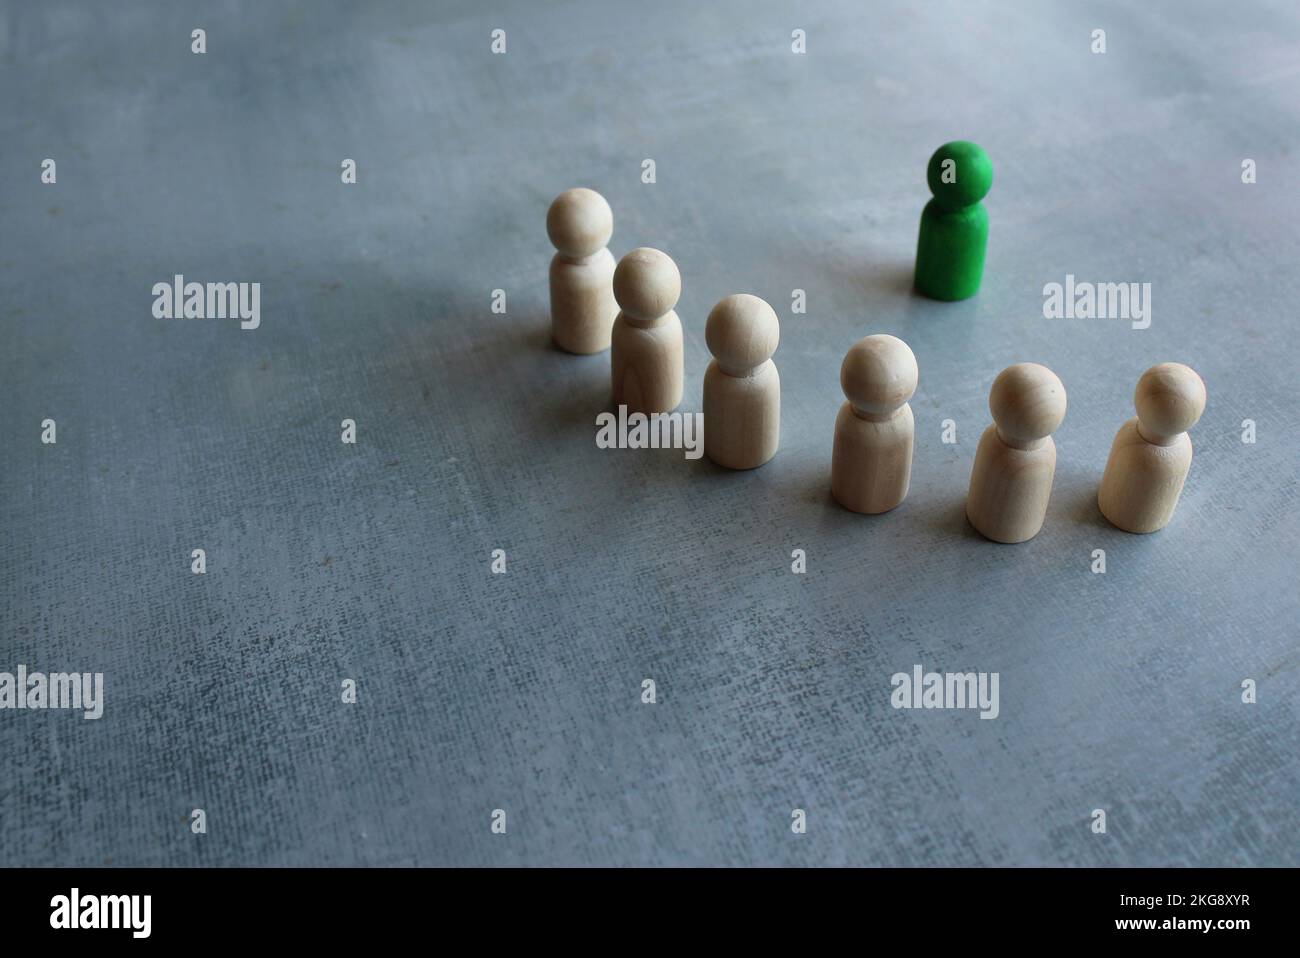 Green wooden doll in front of white wooden dolls. Leader, coaching and mentoring concept. Stock Photo